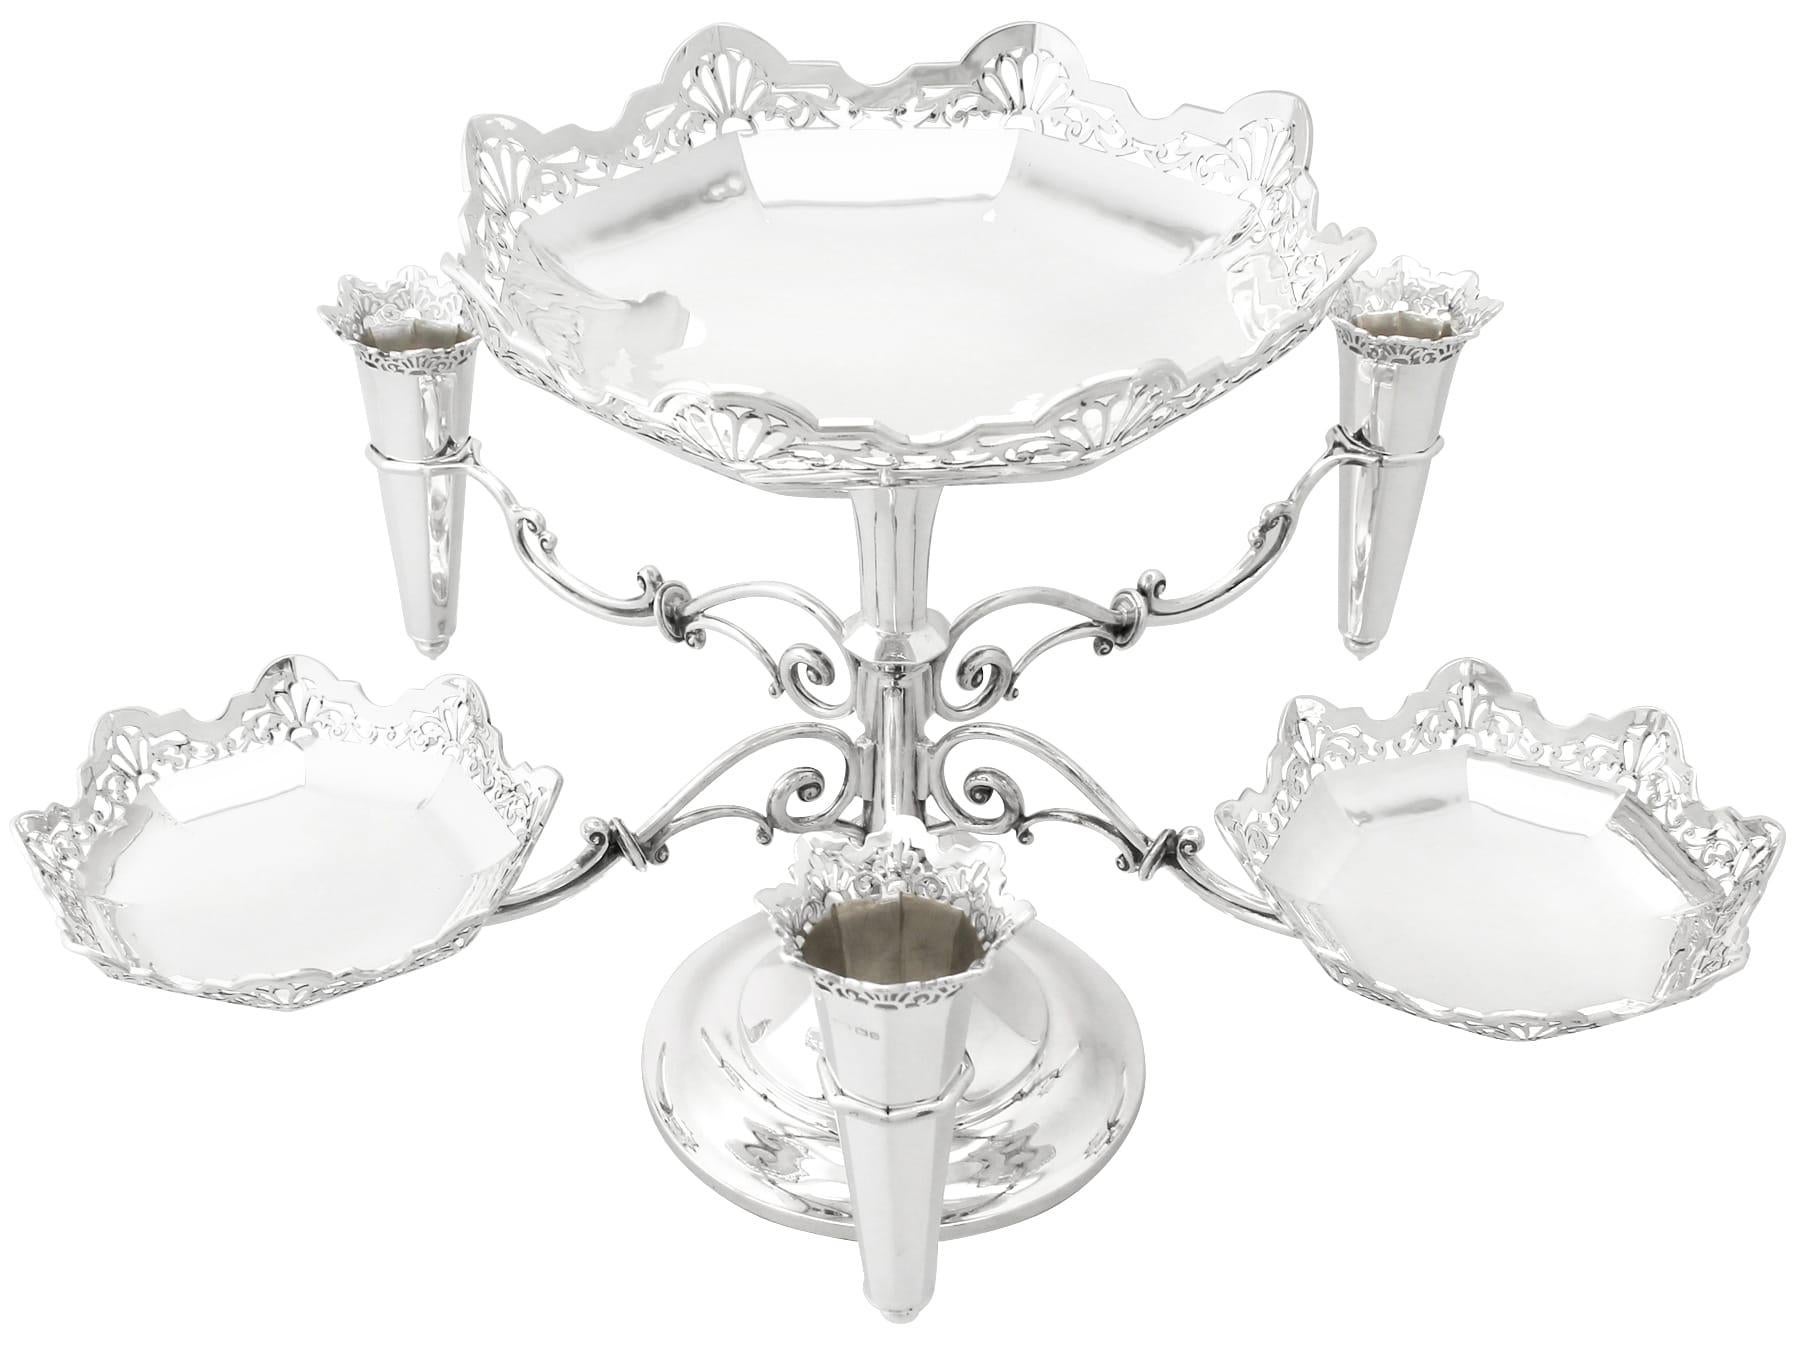 A magnificent, fine and impressive antique George V English sterling silver epergne/centrepiece; an addition to our ornamental silverware collection

This magnificent antique George V sterling silver centerpiece has a circular panelled form onto a